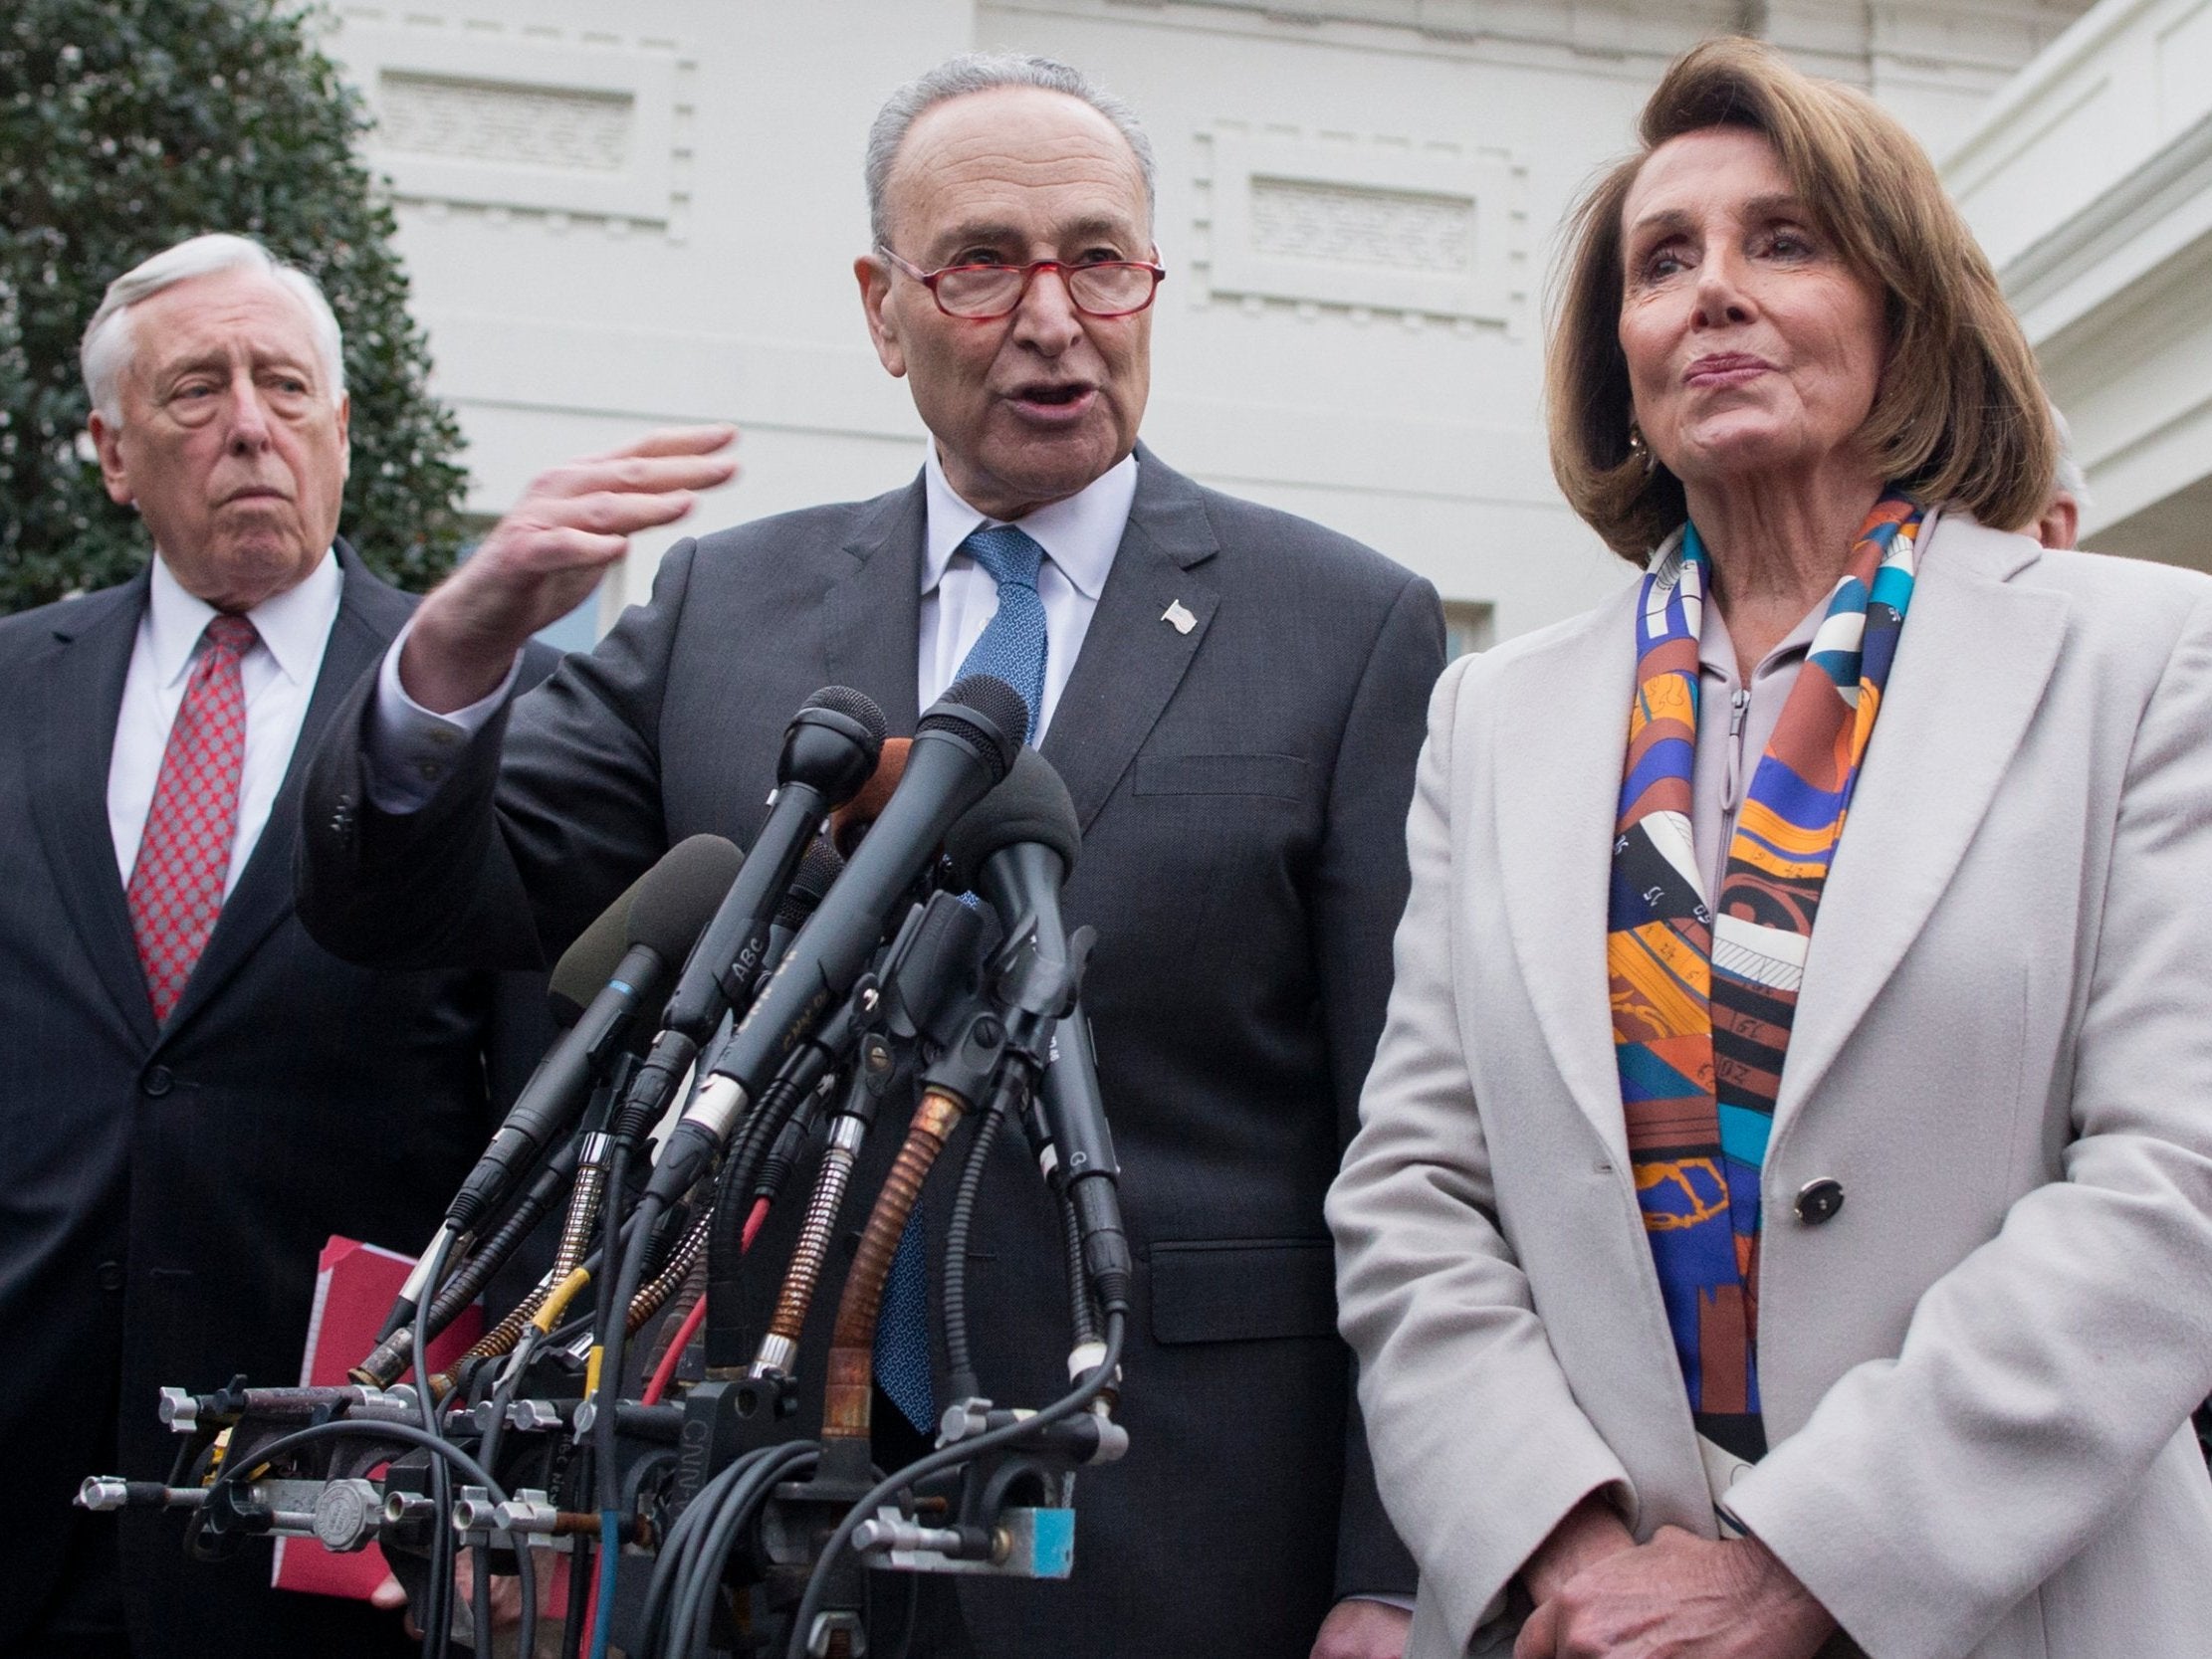 Chuck Schumer (centre) and Nancy Pelosi speak to reporters after the meeting